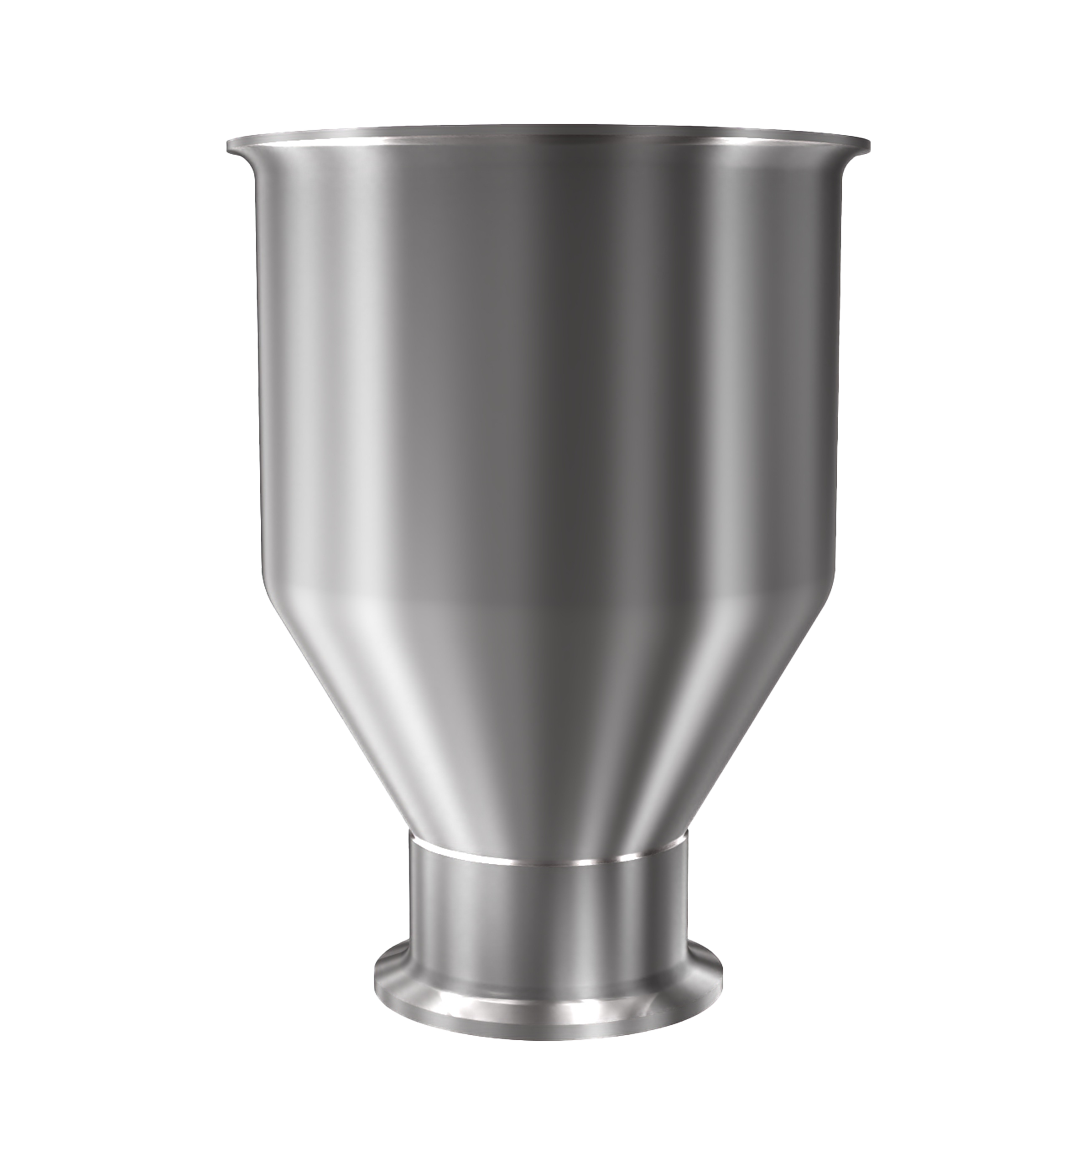 316 Stainless Steel funnel with 1 1/2" sanitary fitting 0.2 gallons, 3.90" ID x 5.84" OAH